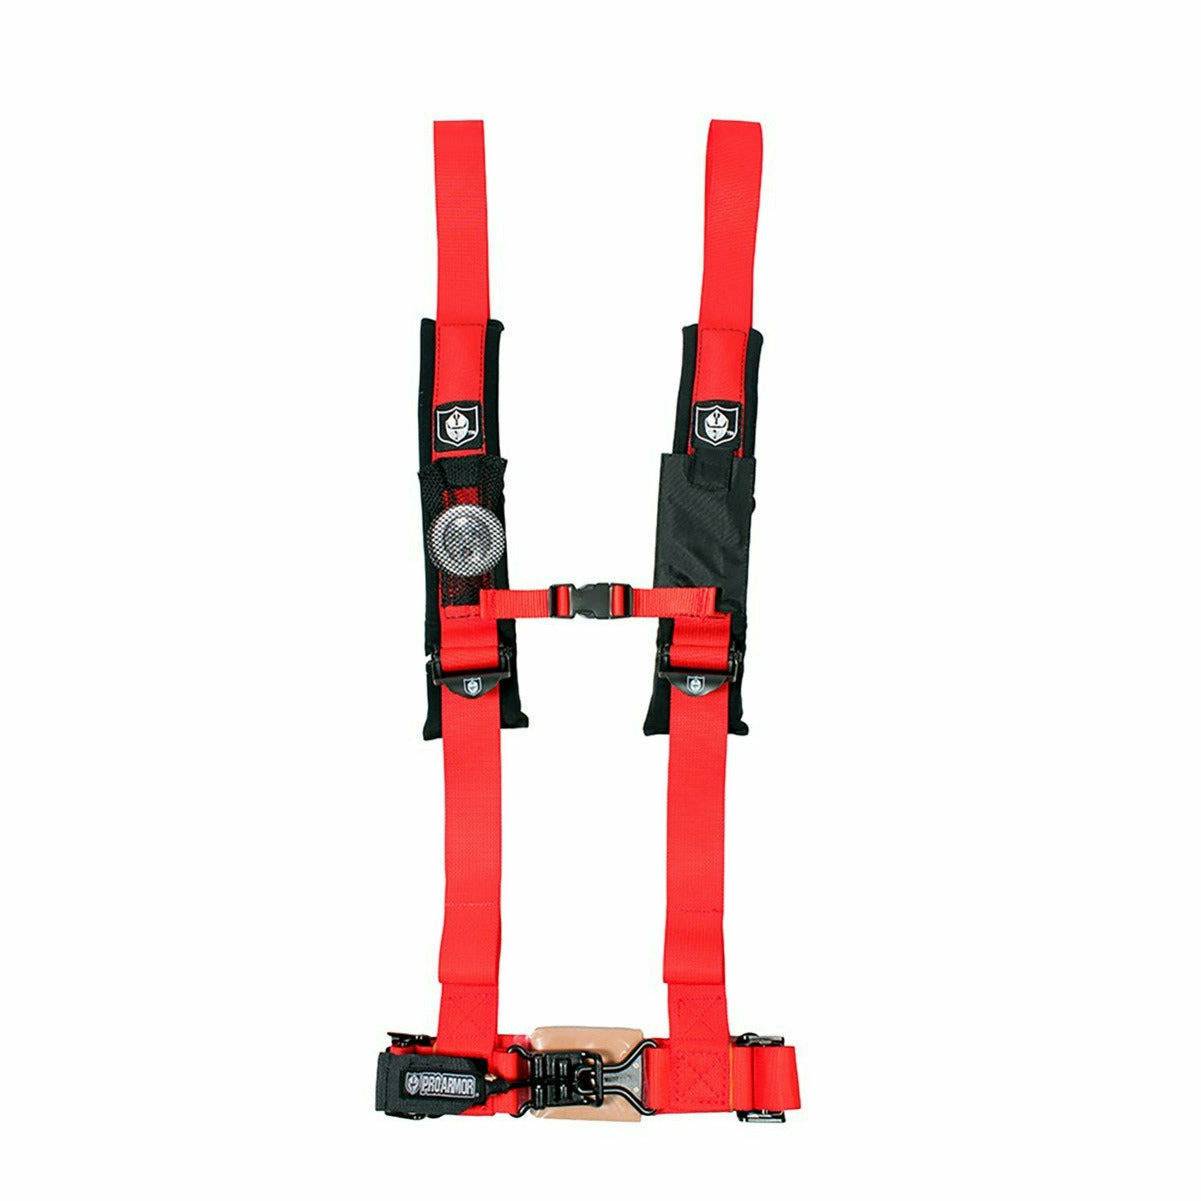 Pro Armor 4 Point 2" Harness w/Sewn in Pads